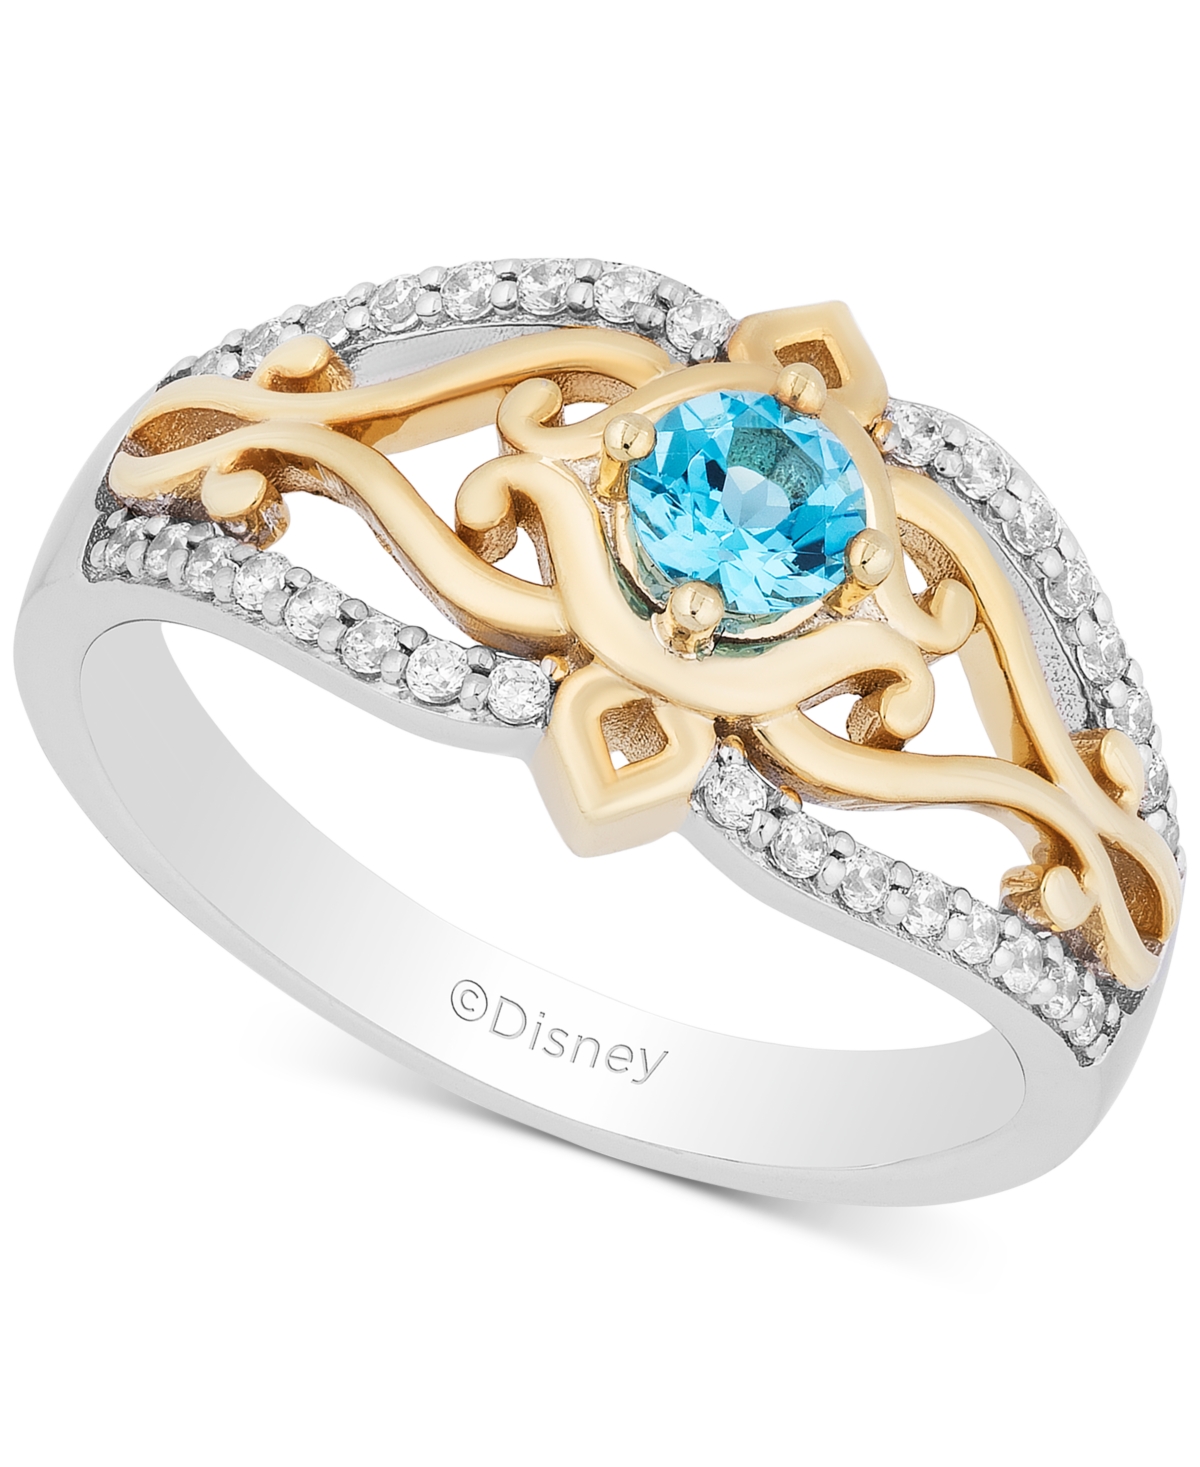 Enchanted Disney Swiss Blue Topaz (1/4 ct. t.w.) & Diamond (1/5 ct. t.w.) Jasmine Ring in 14k Gold & Sterling Silver - STERLING SILVER / yellow gold